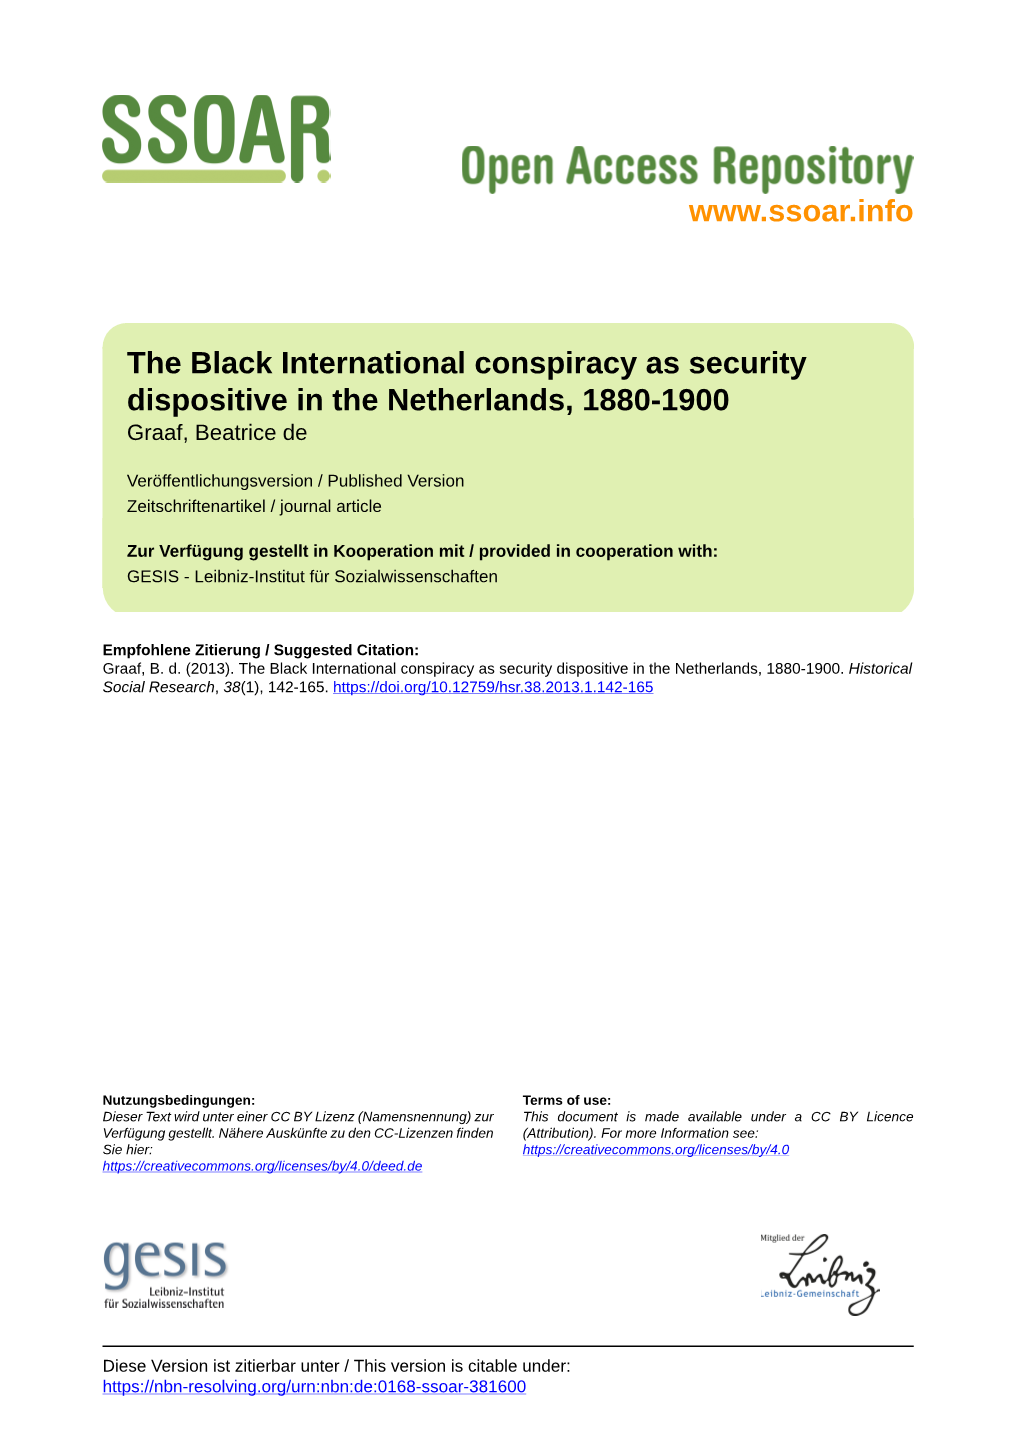 The Black International Conspiracy As Security Dispositive in the Netherlands, 1880-1900 Graaf, Beatrice De